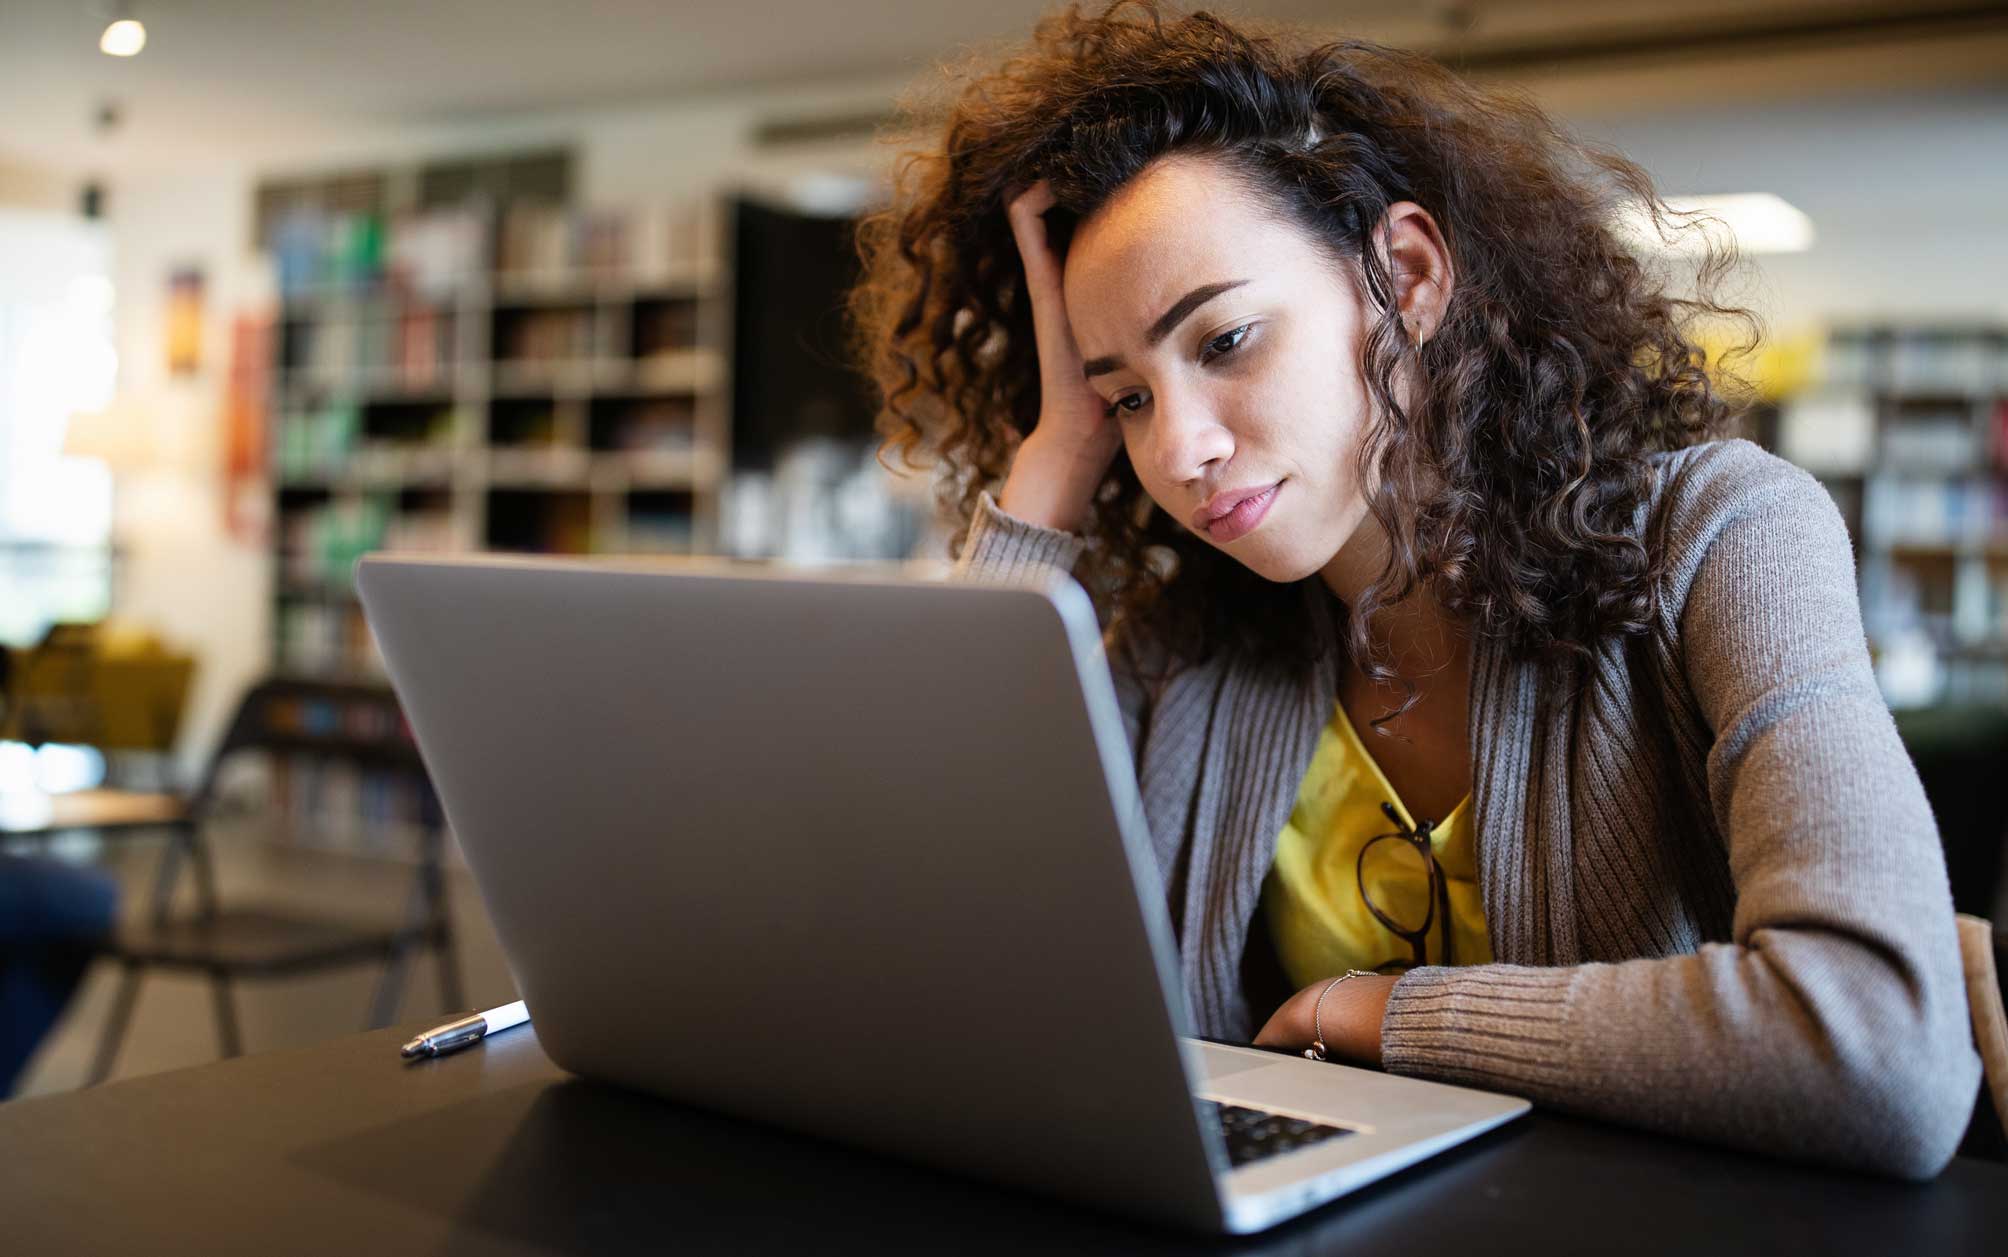 A young woman is looking confused at a laptop while working in a library.